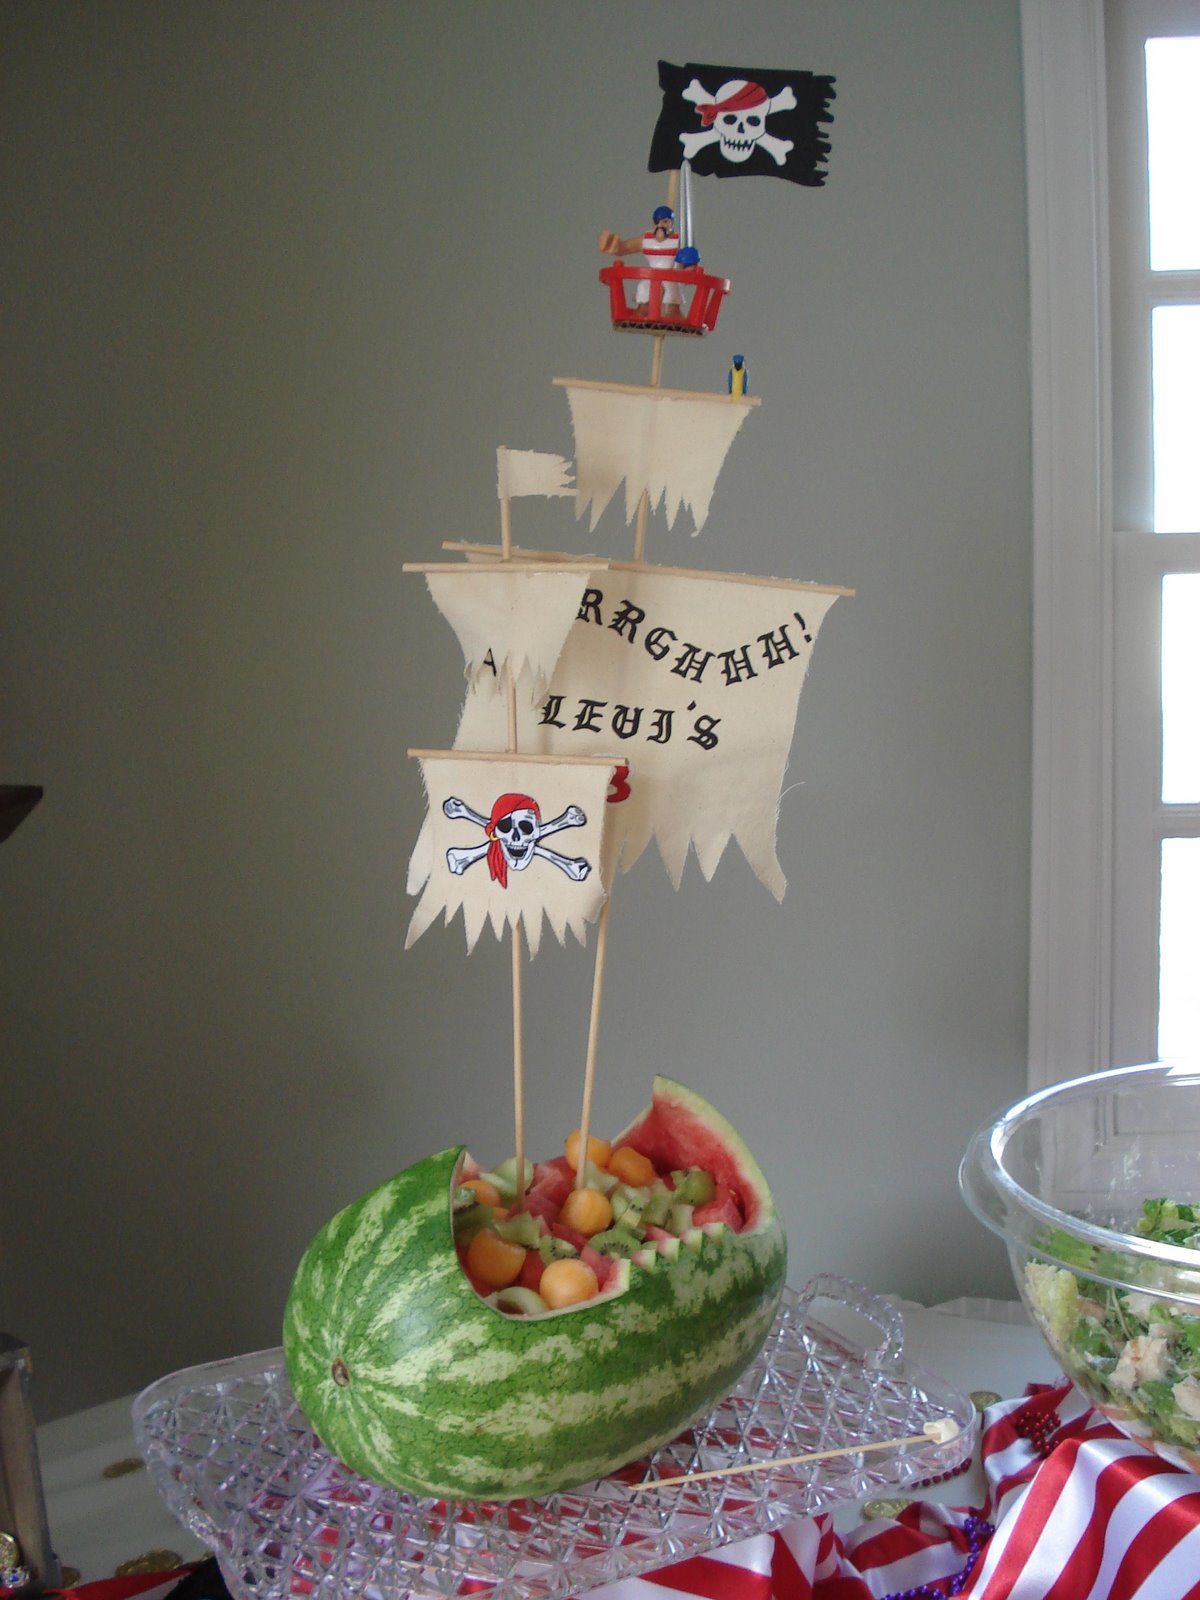 cool cake designs for adults What a great centerpiece for your pirate-themed birthday party. Looks 